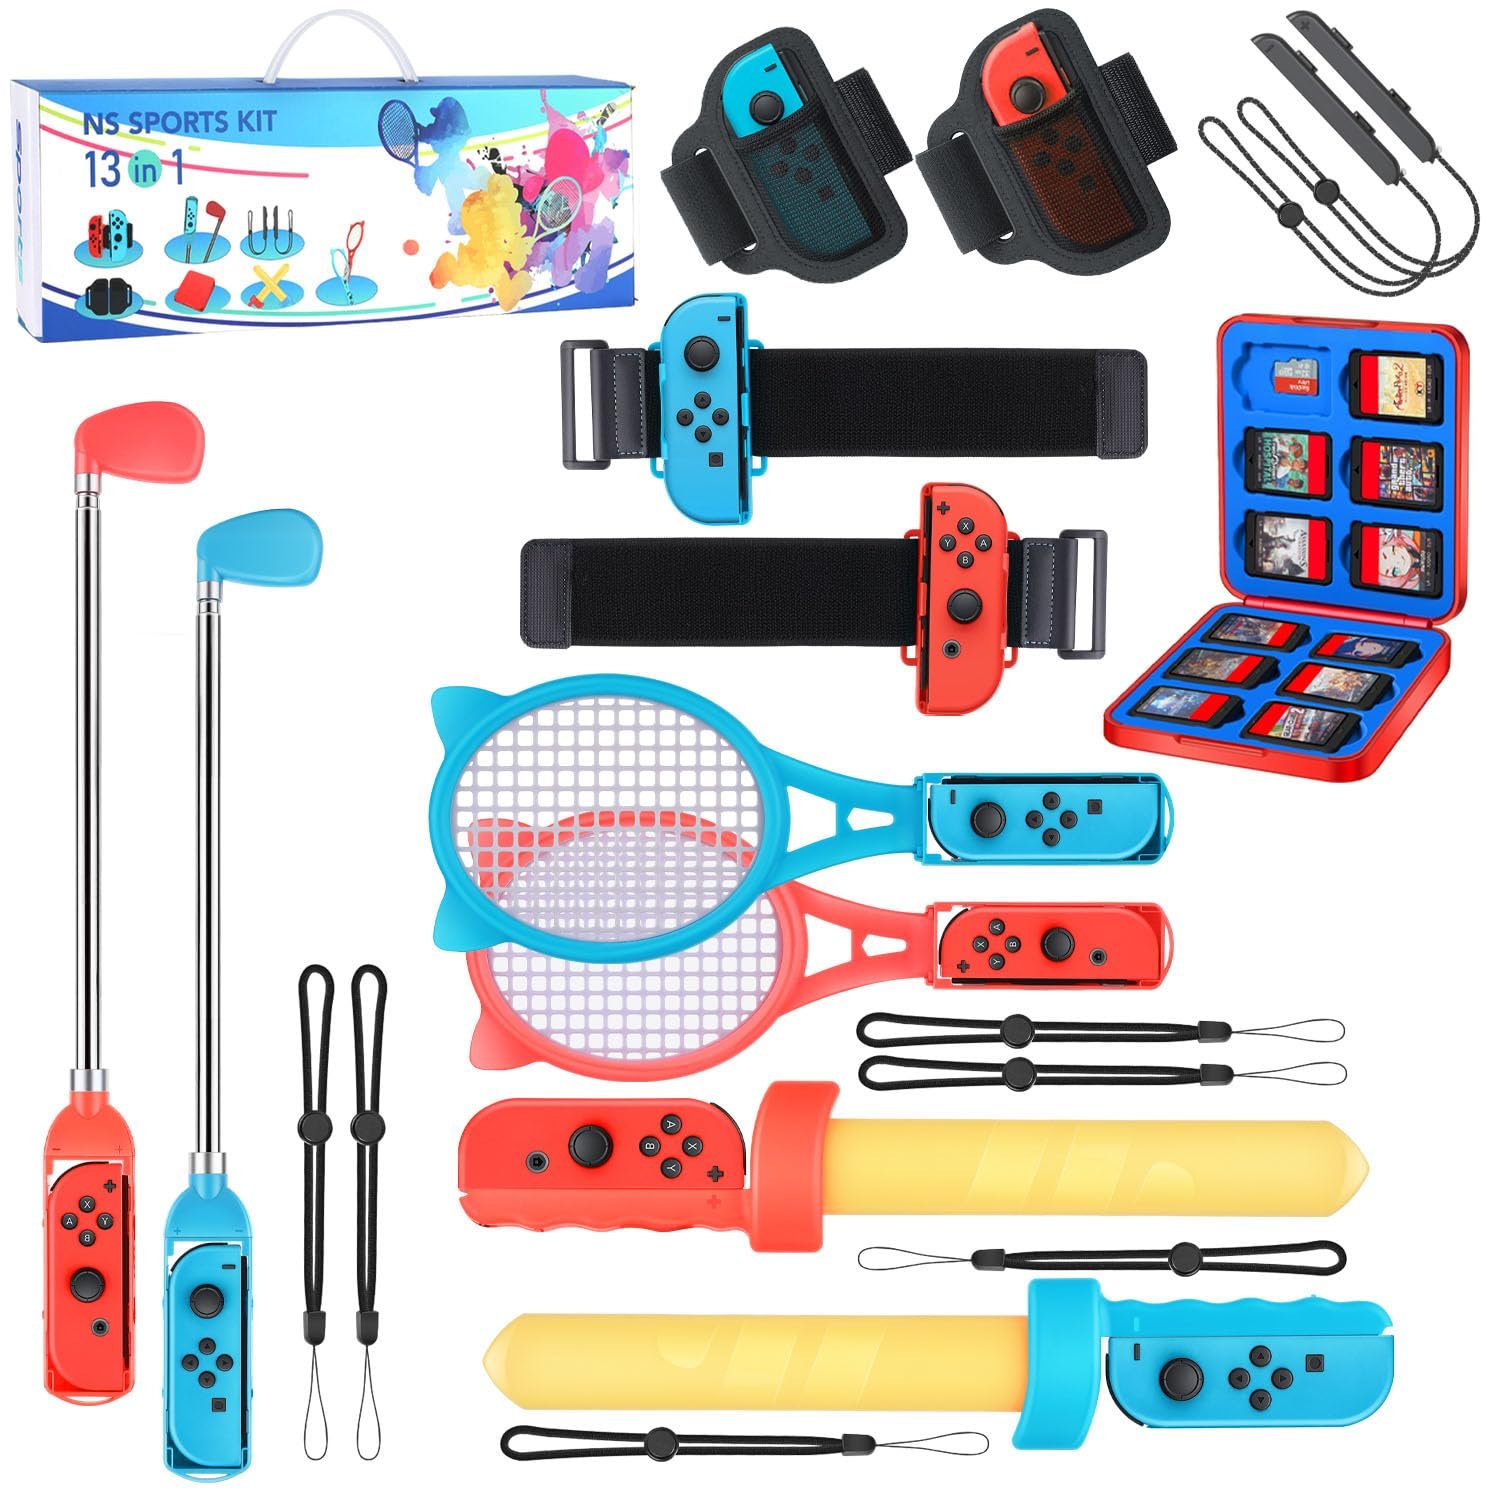 Switch Sports Accessories Bundle - 13 in 1 Family Pack with Tennis Rackets, Adjustable Golf Clubs, Chambara Swords, Soccer Leg Straps, Wrist Band, Joycon Strap, Game Case for Switch  OLED